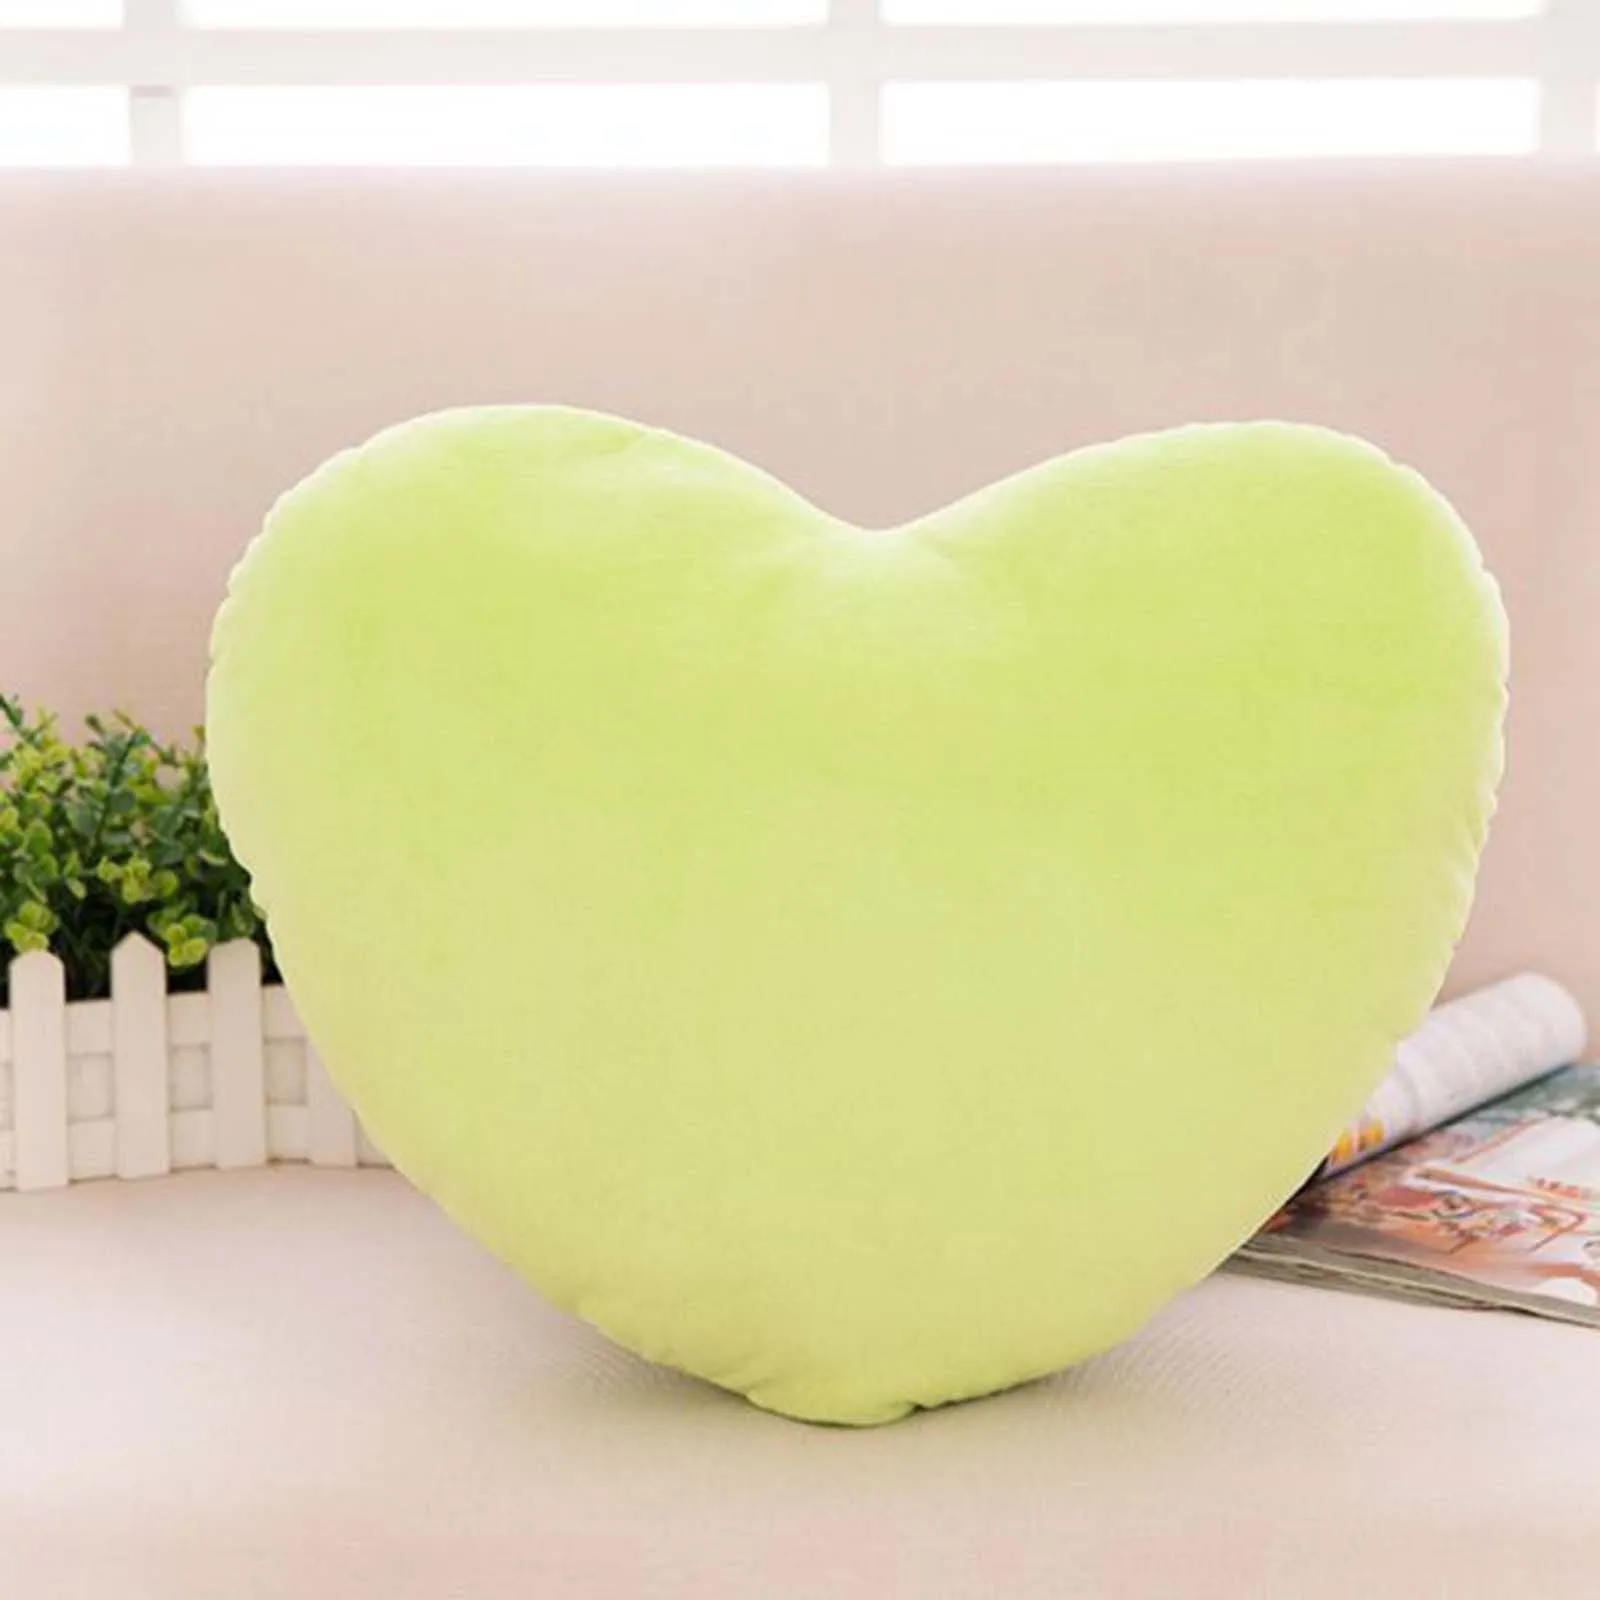 Valentines Day Decor Pillow Living Room Bedroom Heart Shape Decorative Throw Pillow Cotton Soft Doll Lover Gift 15//20/30/40cm